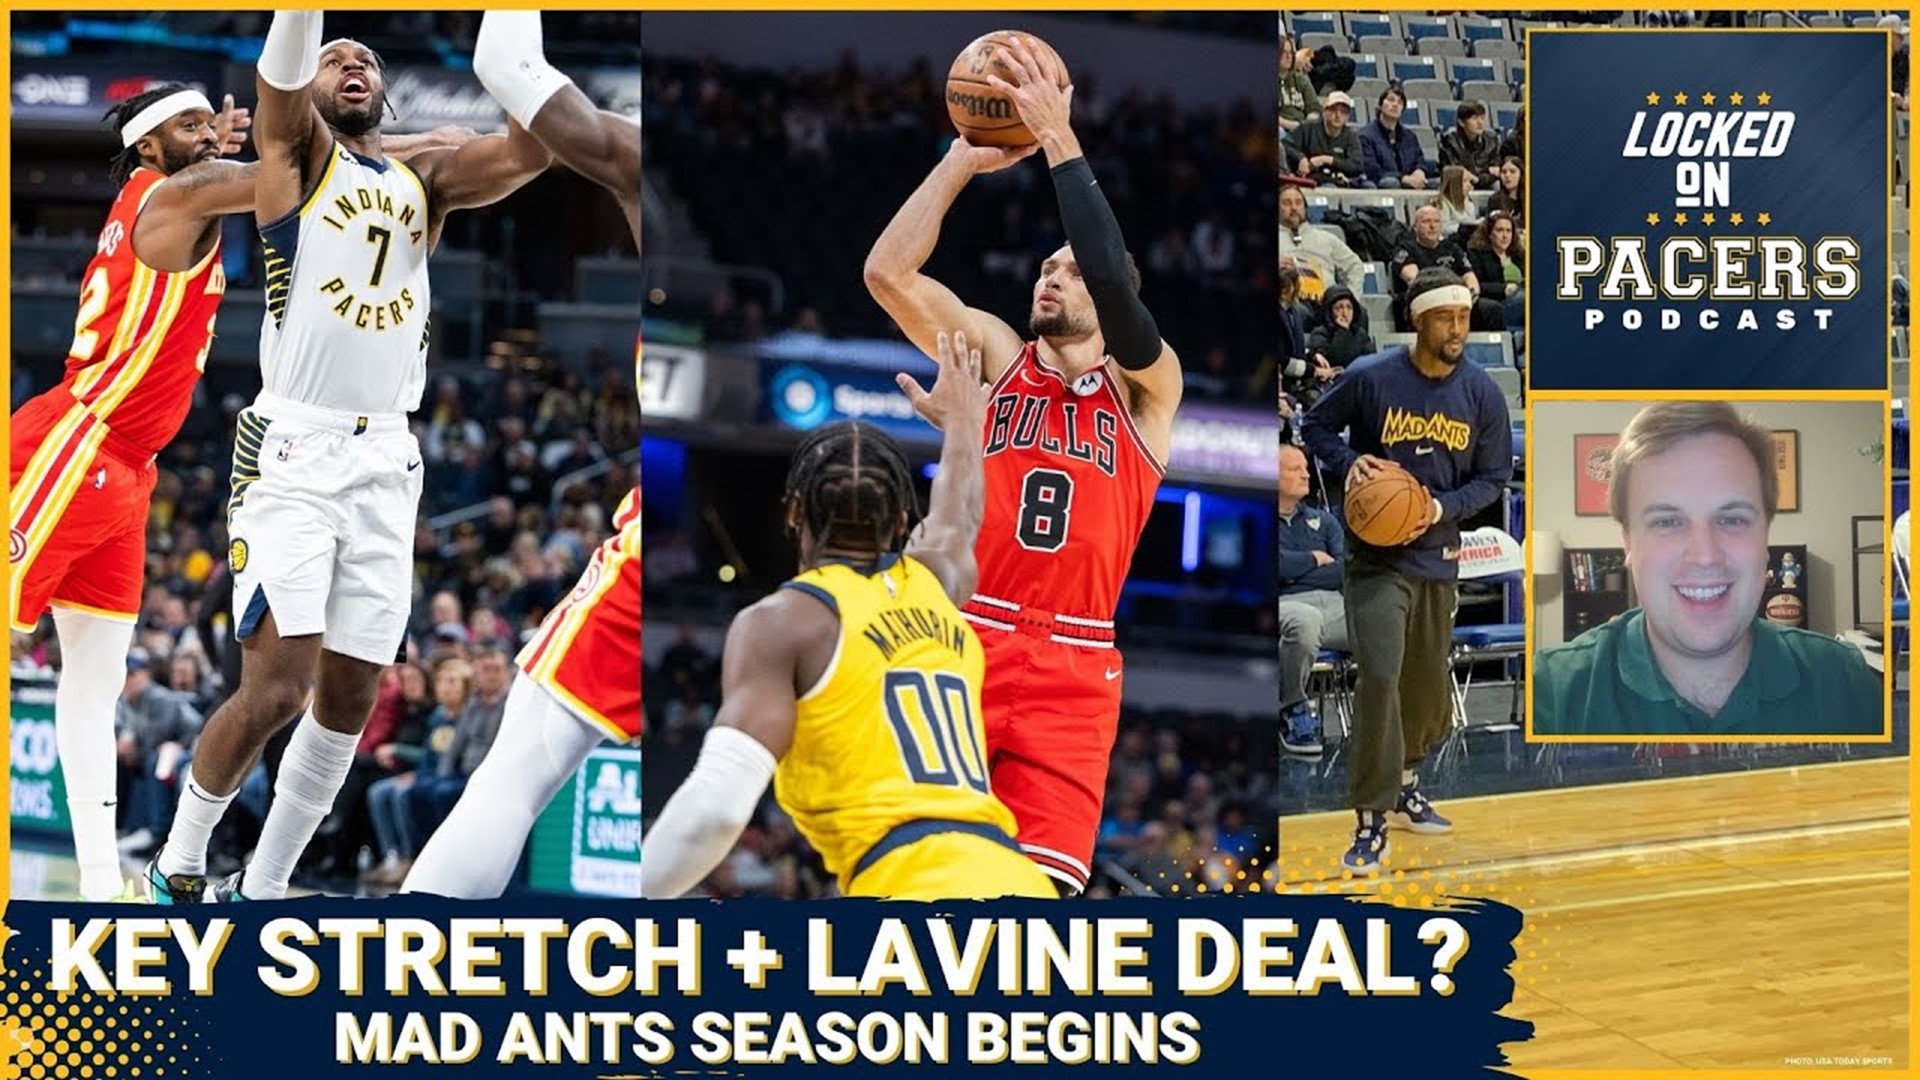 Does a Zach LaVine trade make sense for Indiana Pacers? Important schedule stretch, Mad Ants playing